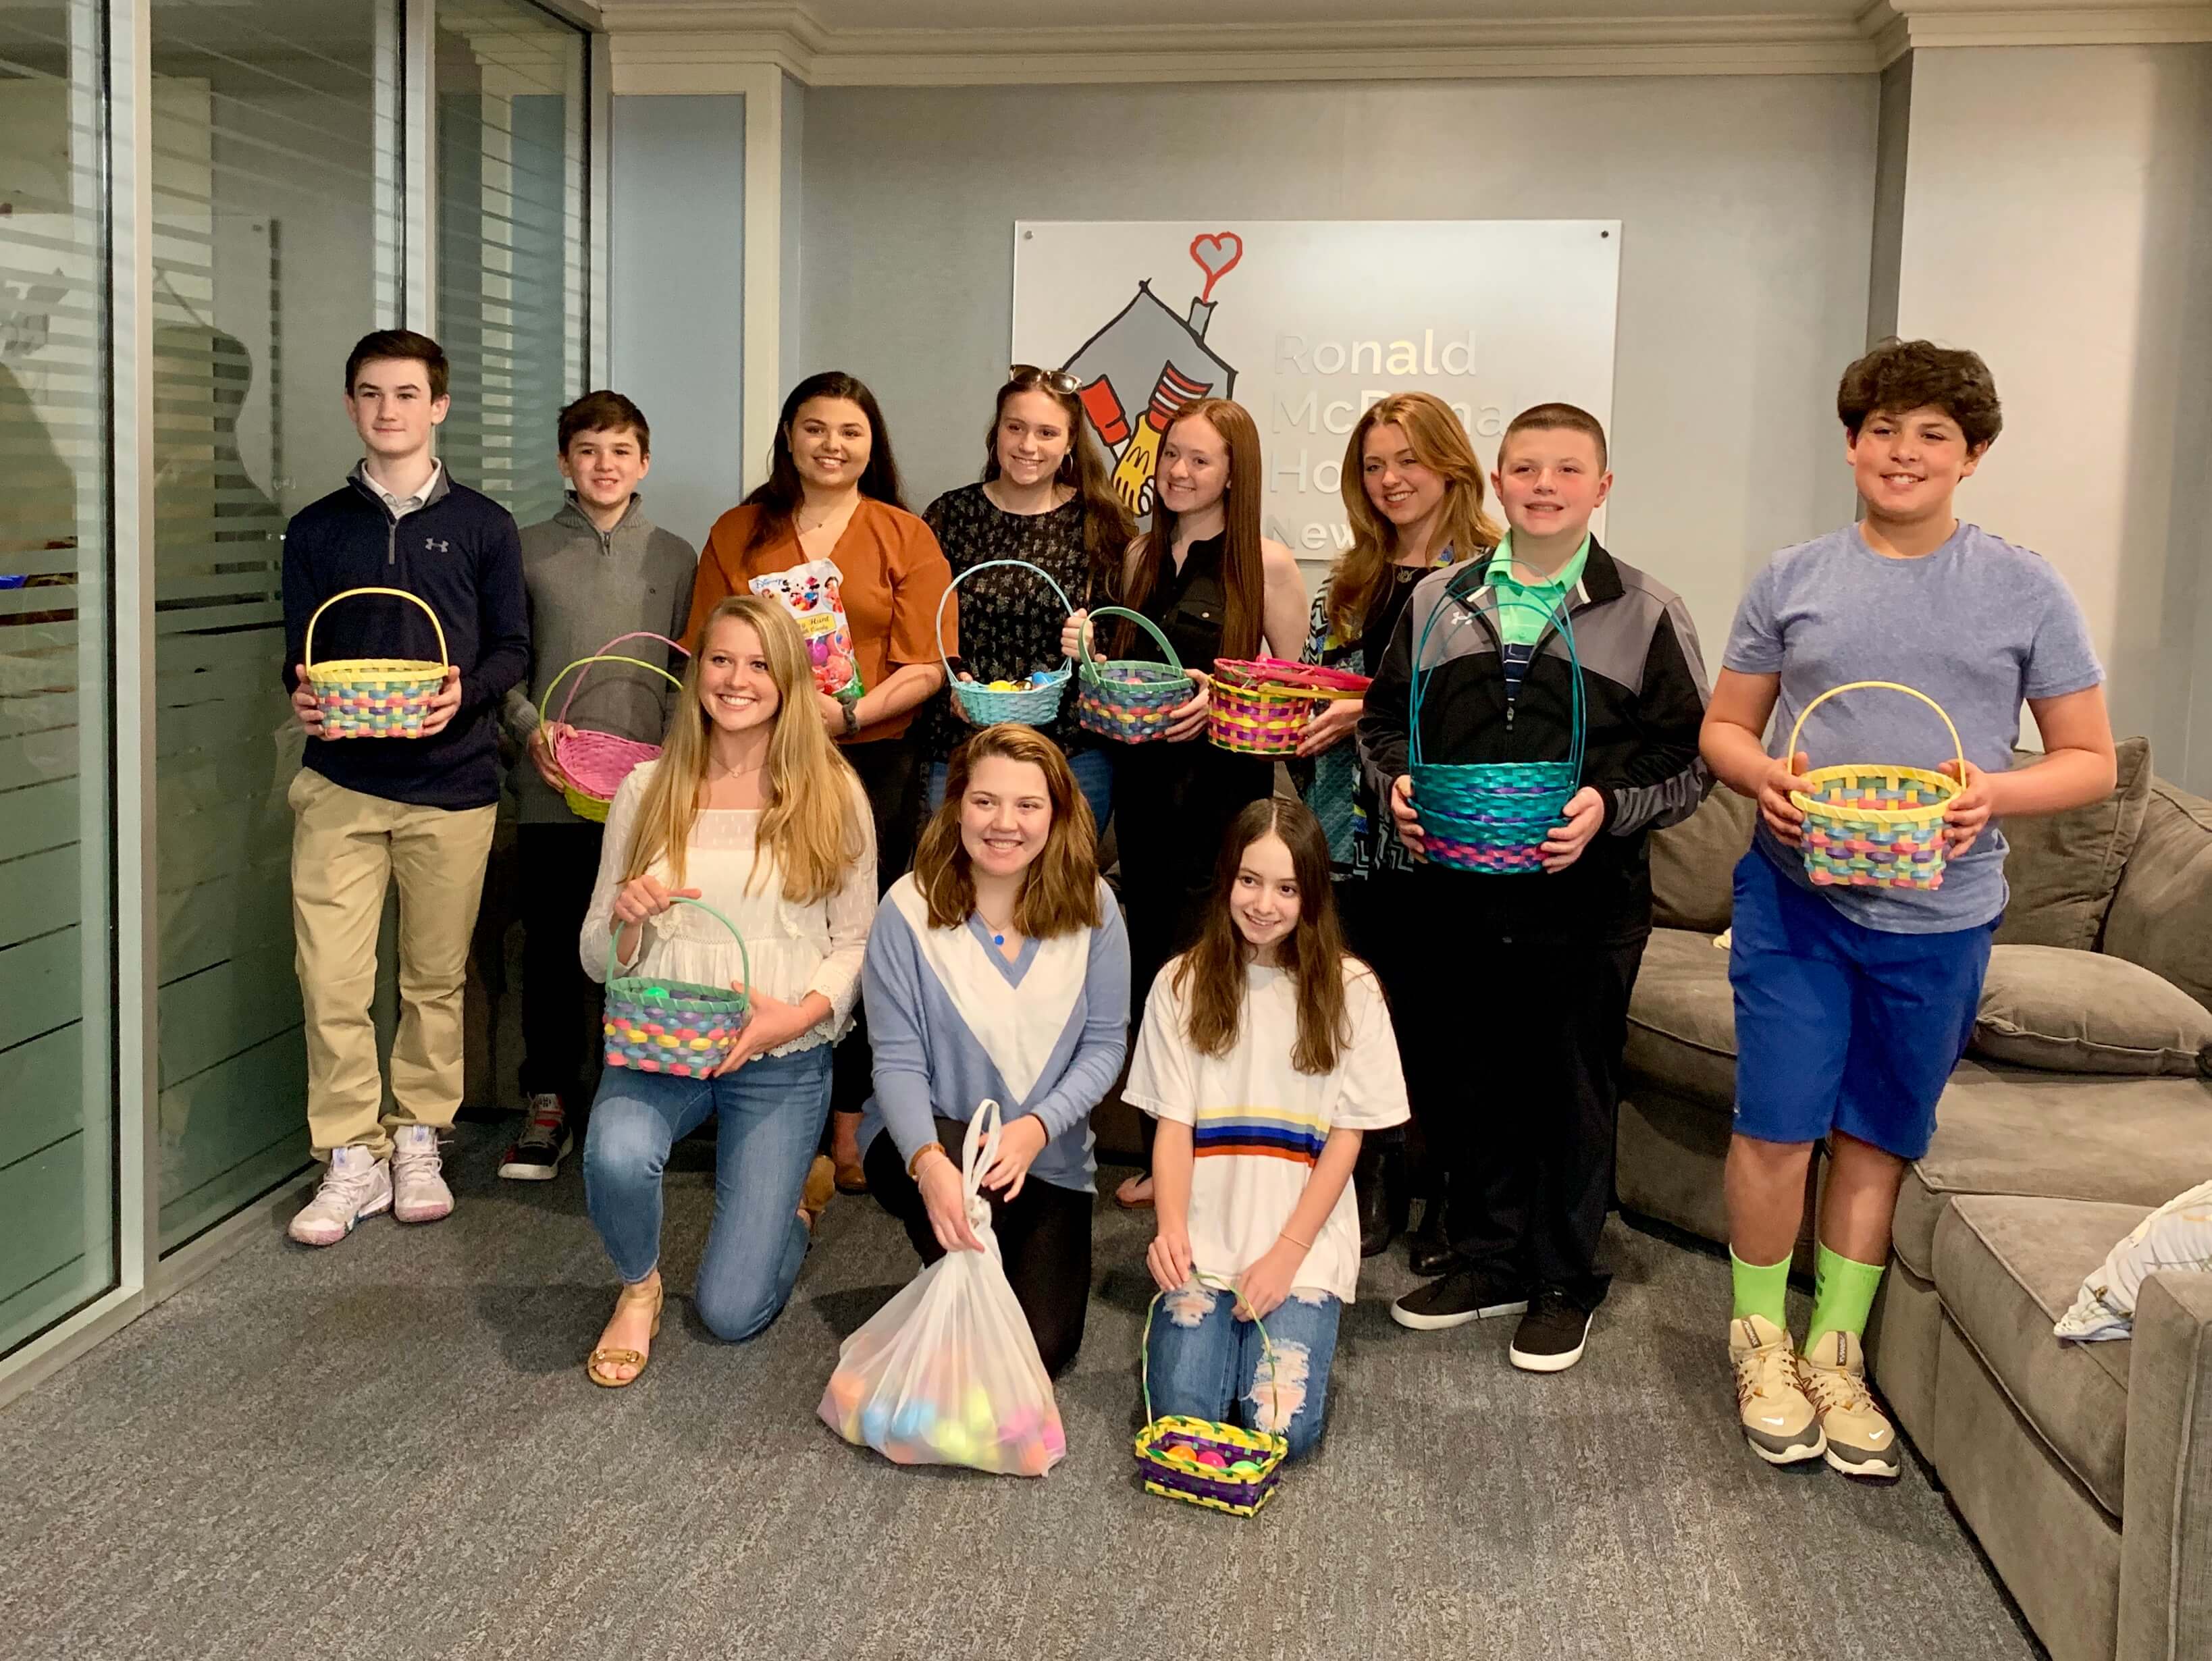 HLF Young Ambassadors Volunteer to celebrate Easter with the Ronald McDonald House in New York, New York.